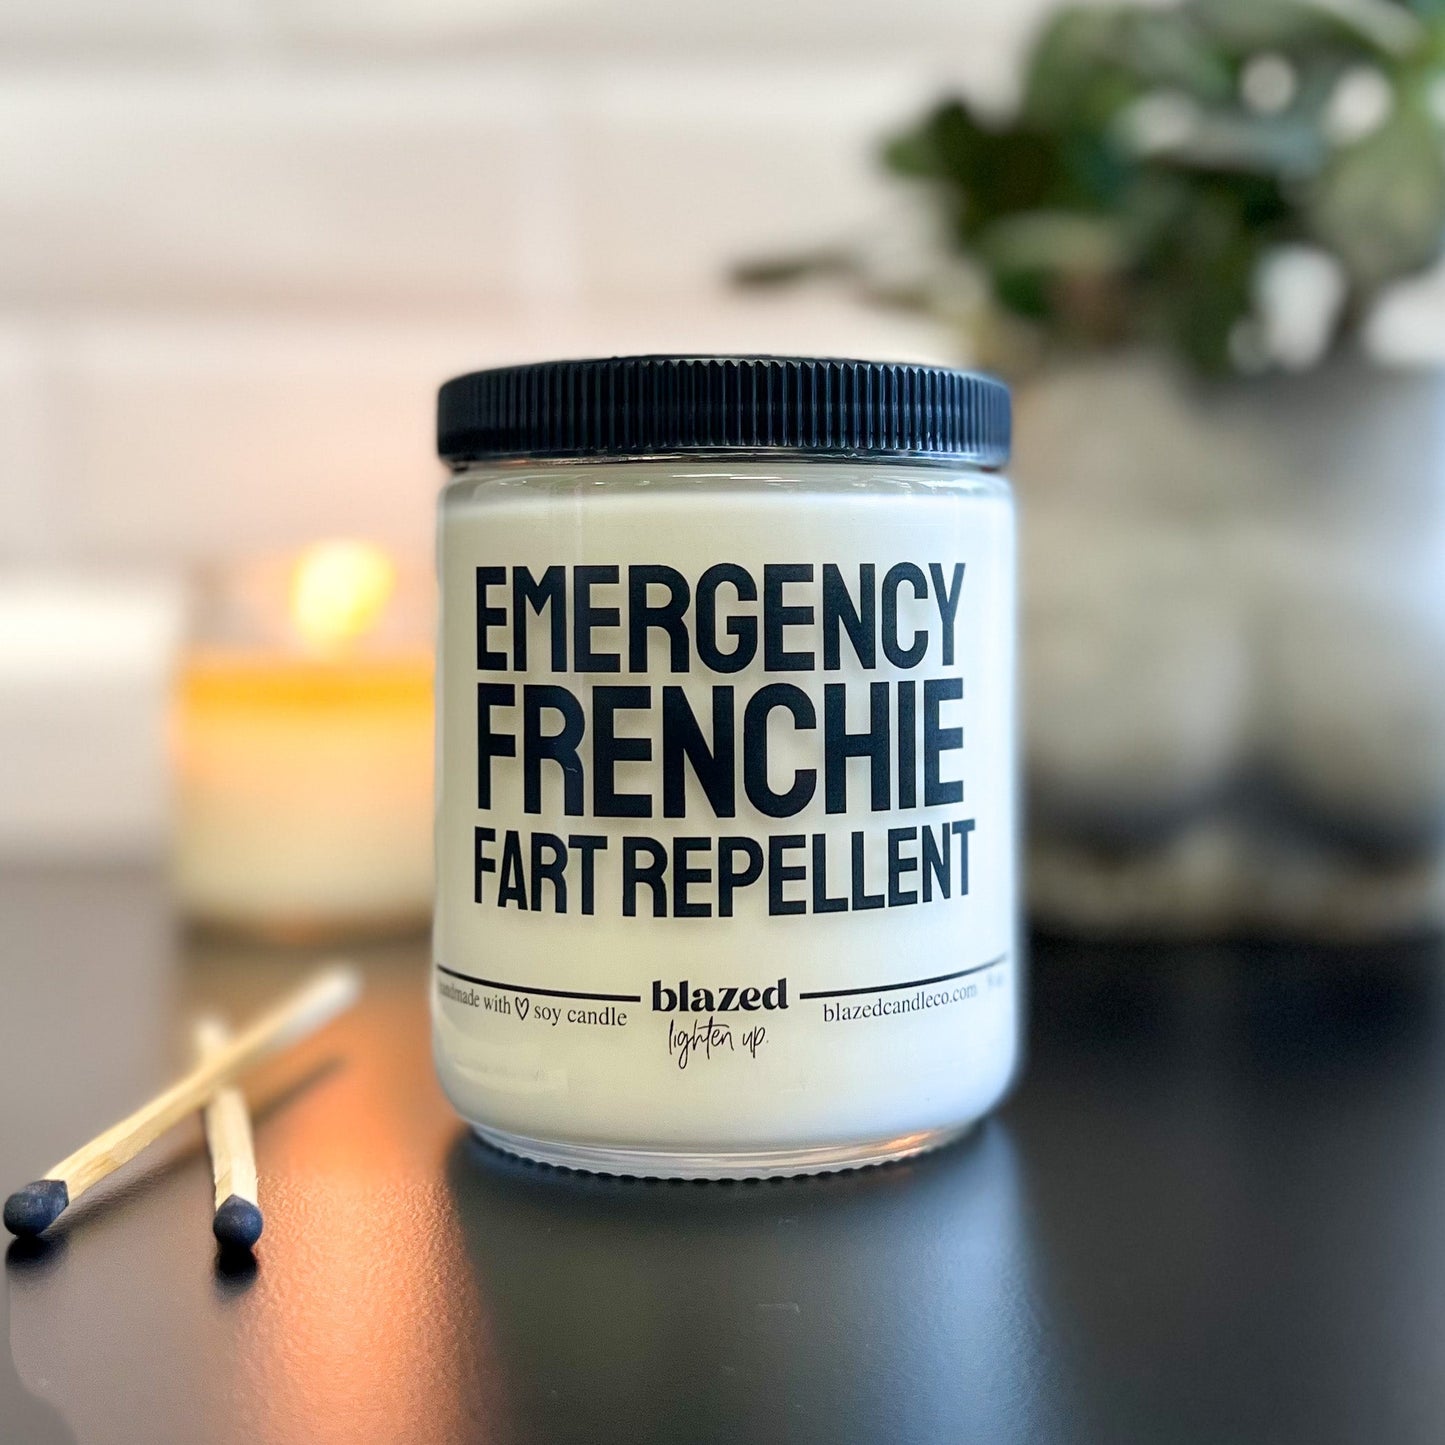 Emergency Frenchie Fart Repellent Candle